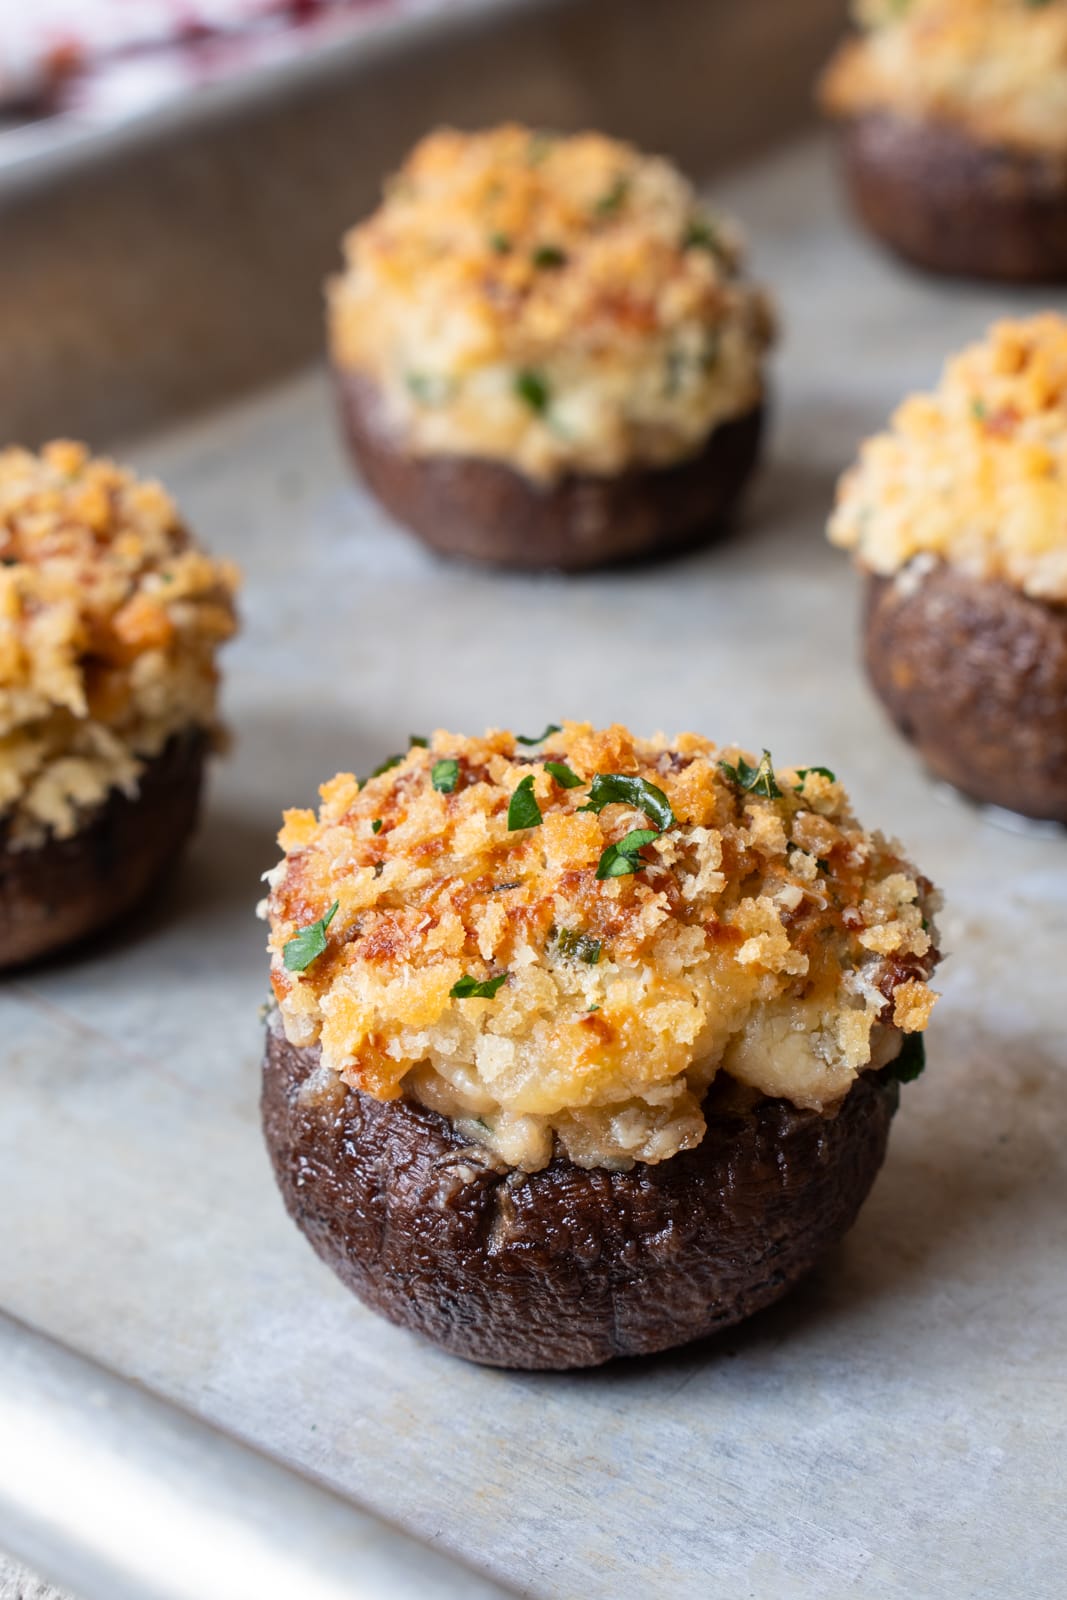 Boursin Stuffed Mushrooms | For the Love of Cooking